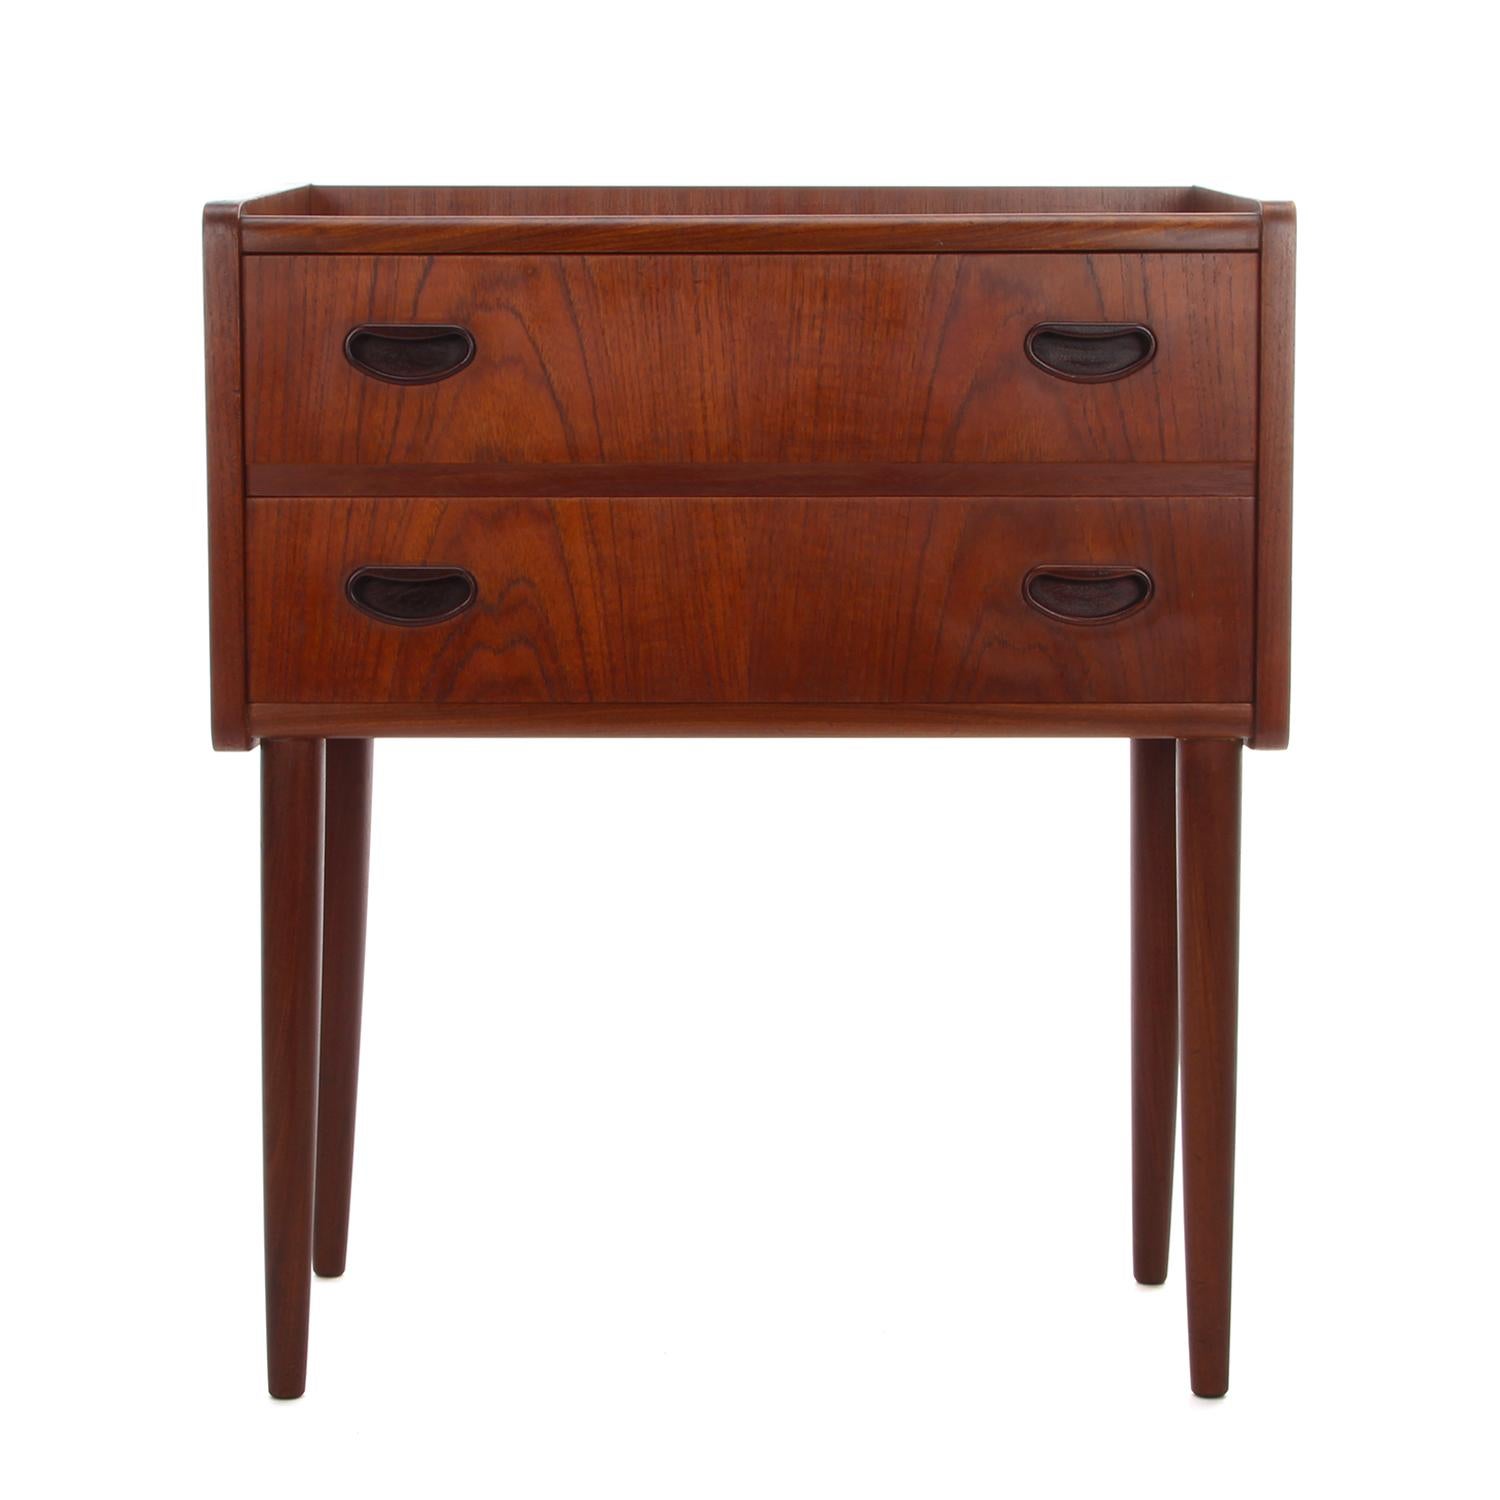 Mid-Century Modern Rosewood Dresser, 1960s Danish Midcentury Chest with Drawers or Entry Table